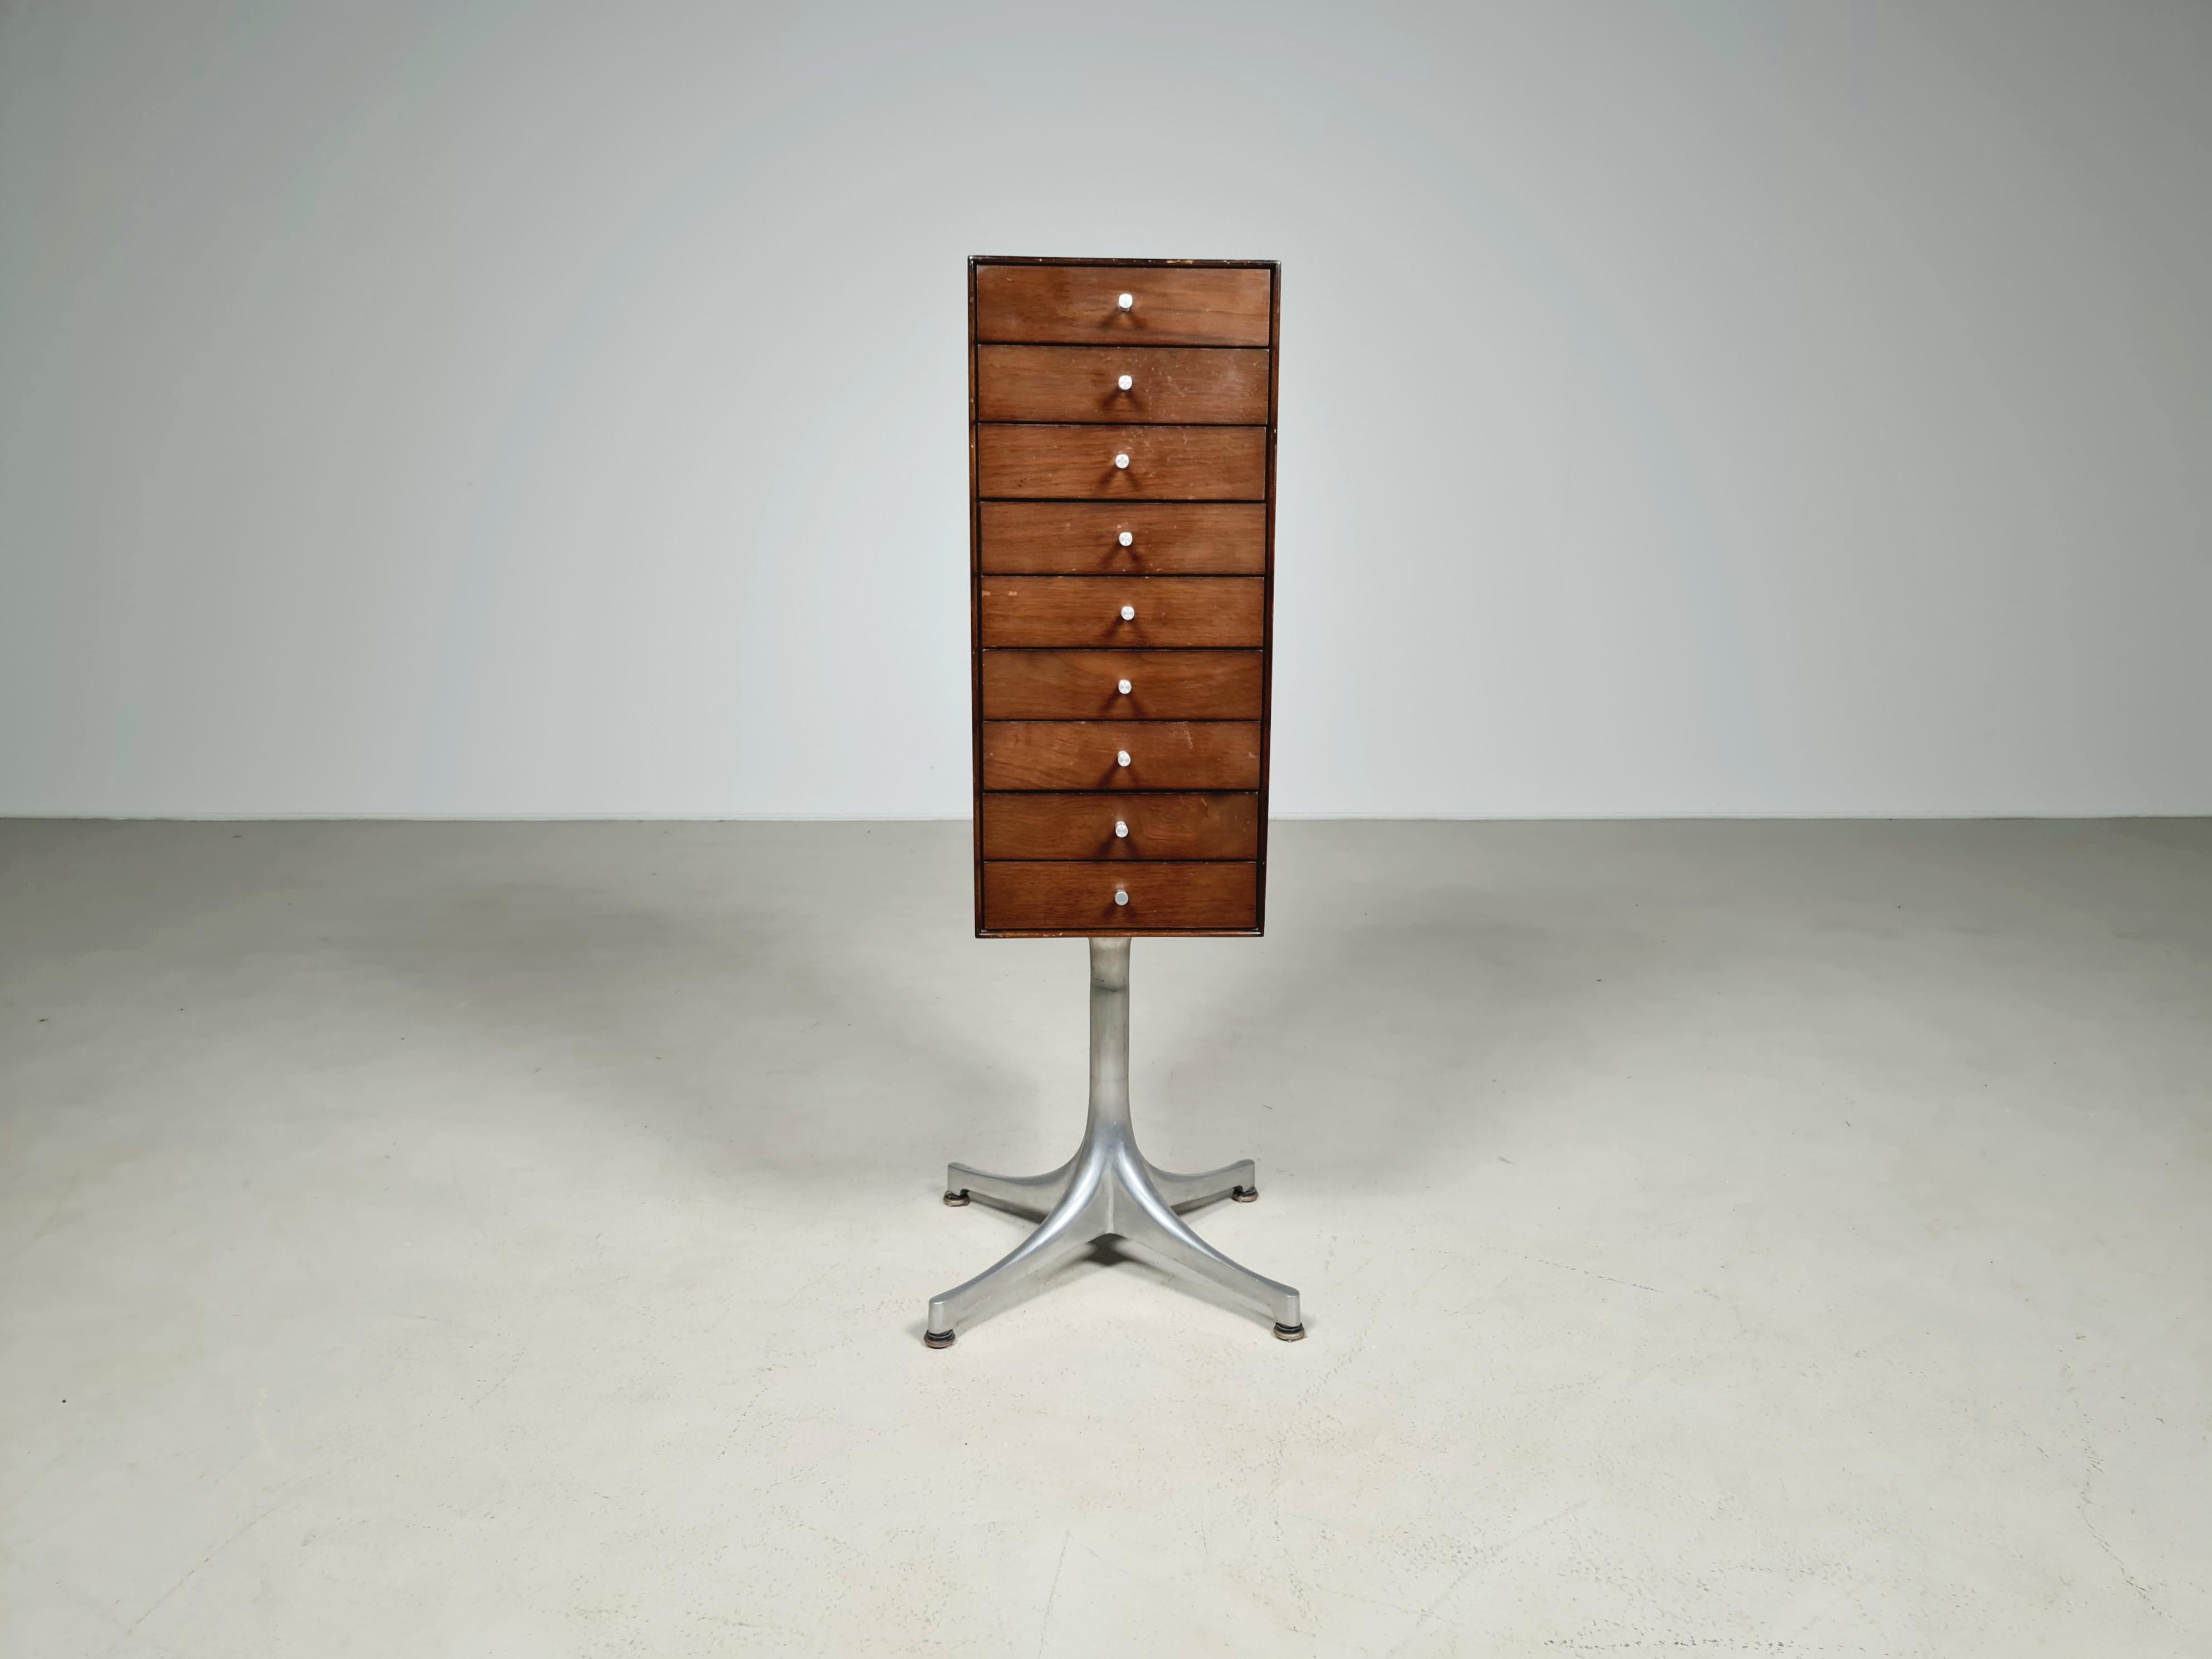 George Nelson vertical chest of drawers/jewelry cabinet for Herman Miller model 5517.
The walnut wood miniature chest, inspired by Japanese design, provides lots of wonderful spaces to keep little things. Made with hand-fitted drawers, Cast